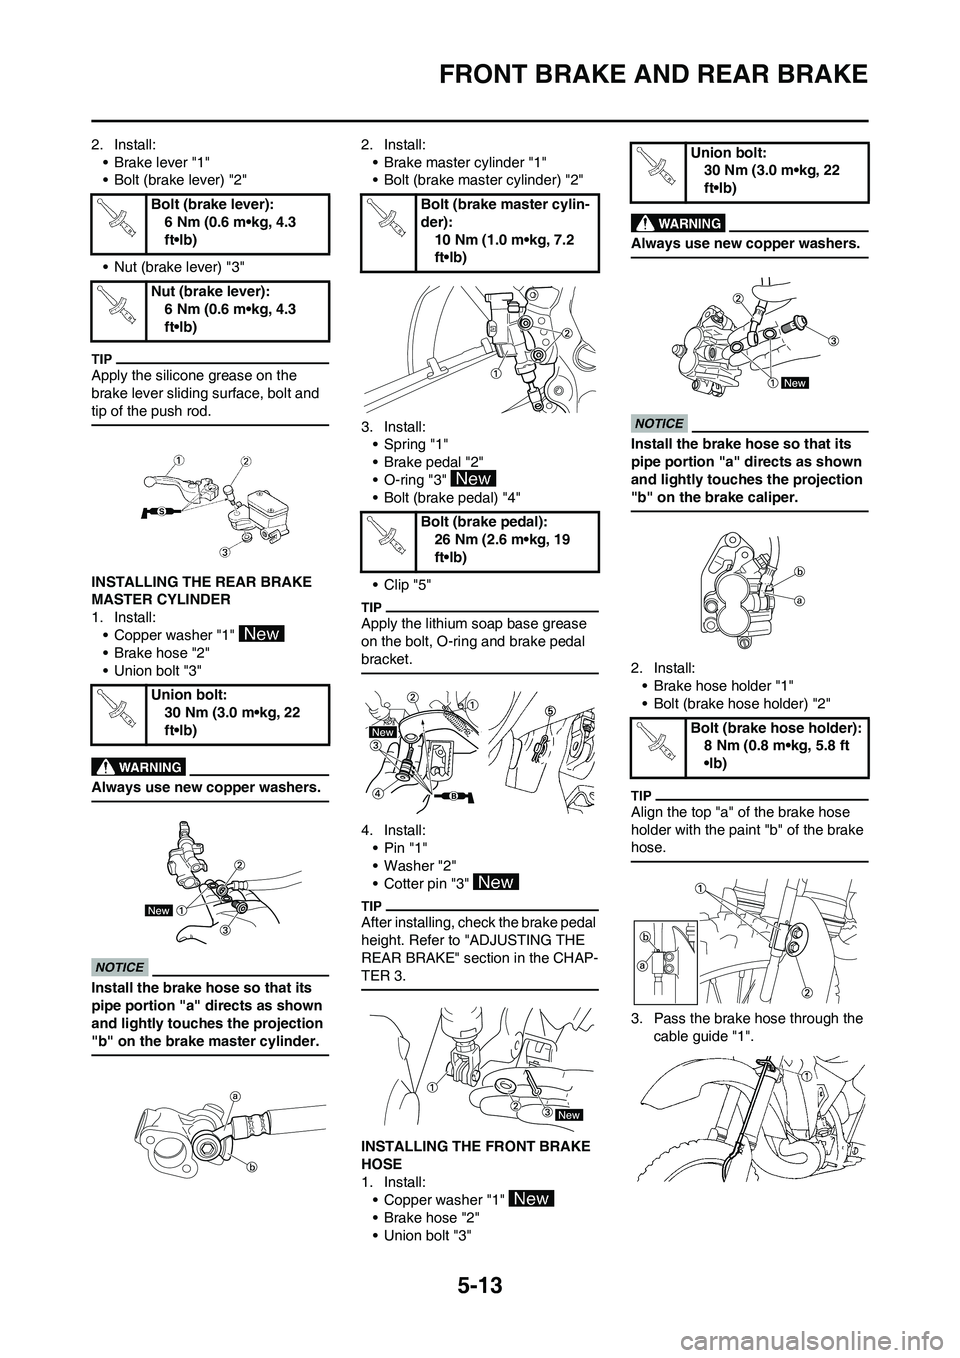 YAMAHA YZ125LC 2010  Owners Manual 5-13
FRONT BRAKE AND REAR BRAKE
2. Install:
• Brake lever "1"
• Bolt (brake lever) "2"
• Nut (brake lever) "3"
Apply the silicone grease on the 
brake lever sliding surface, bolt and 
tip of the